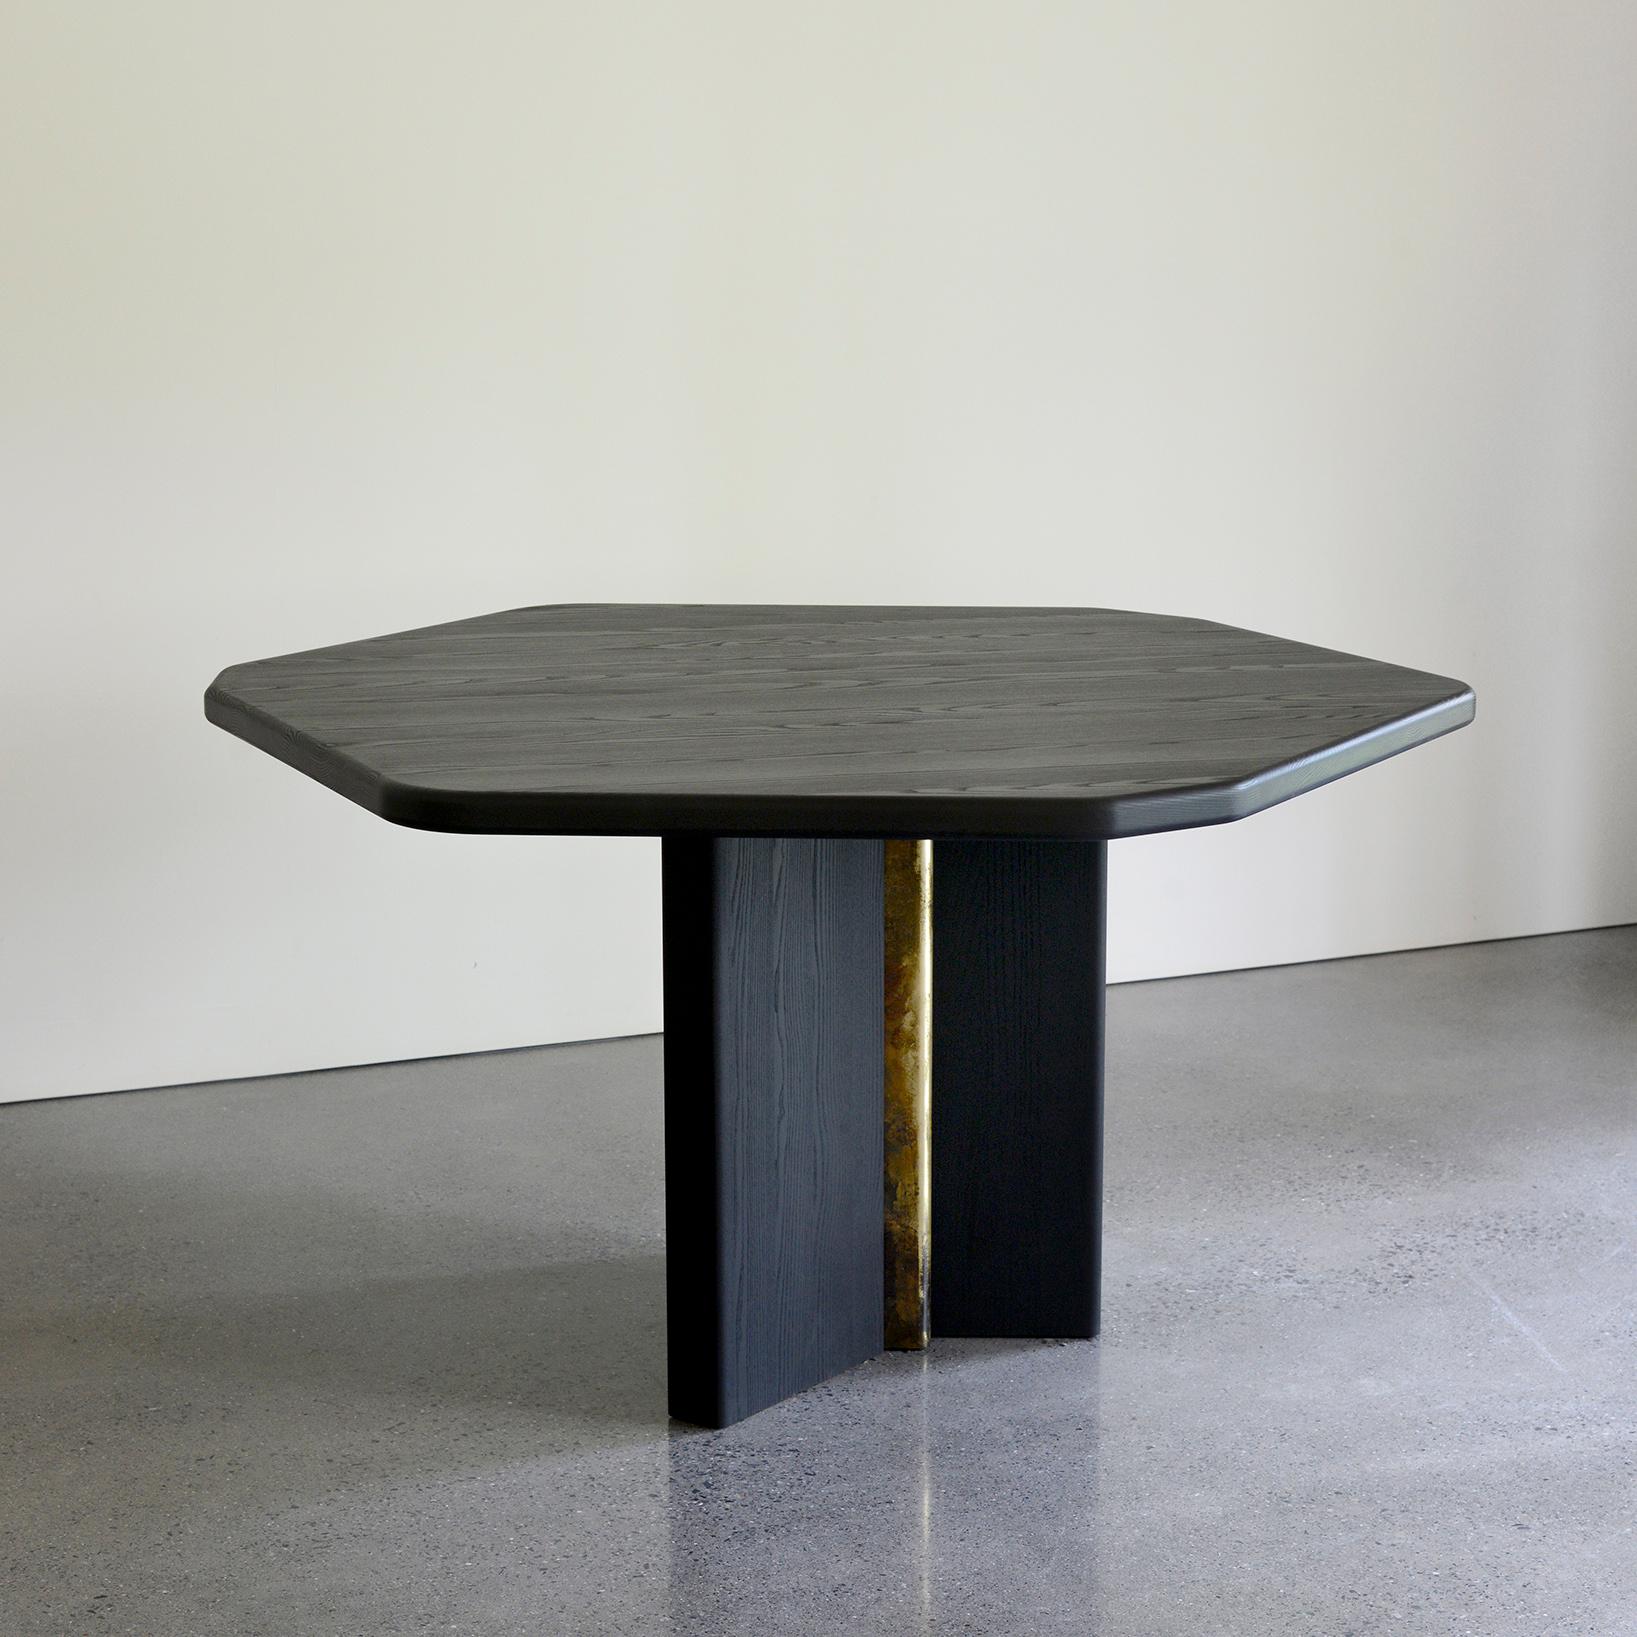 The hex diamond table’s slight angles focus guests around a middle point that can accommodate a centerpiece. The traditional circular approach to seating guests is deconstructed to encourage more dynamic exchanges between people. The surface plays